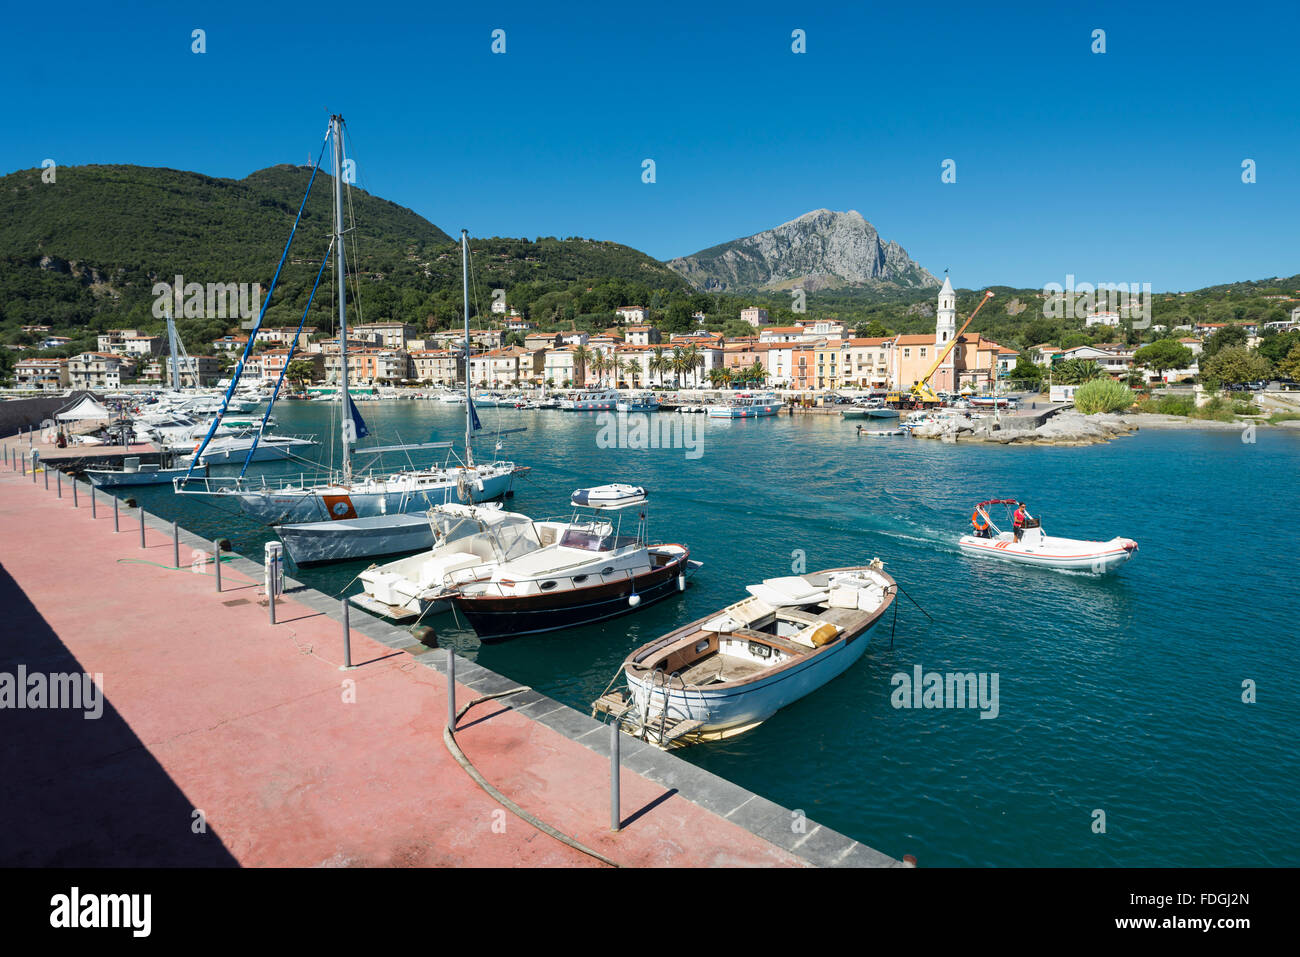 Fishing boats, motor boats and yachts in the picturesque harbor of Scario on the coast of the Mediterranean Sea in Cilento,Italy Stock Photo